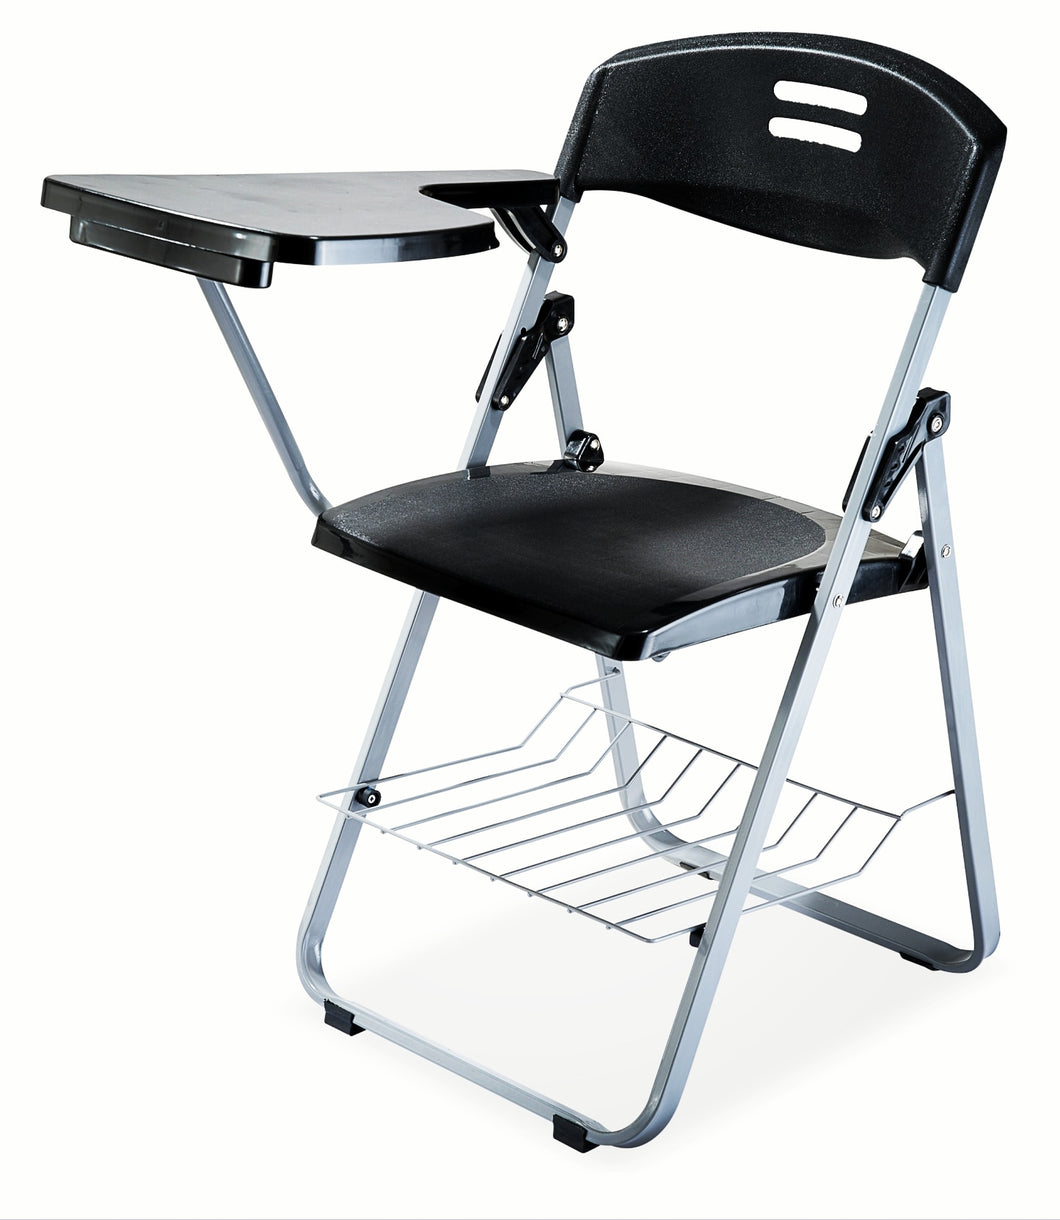 Parasnath Superb-Chair Folding Student Writing Pad Chair in Black - PARASNATH